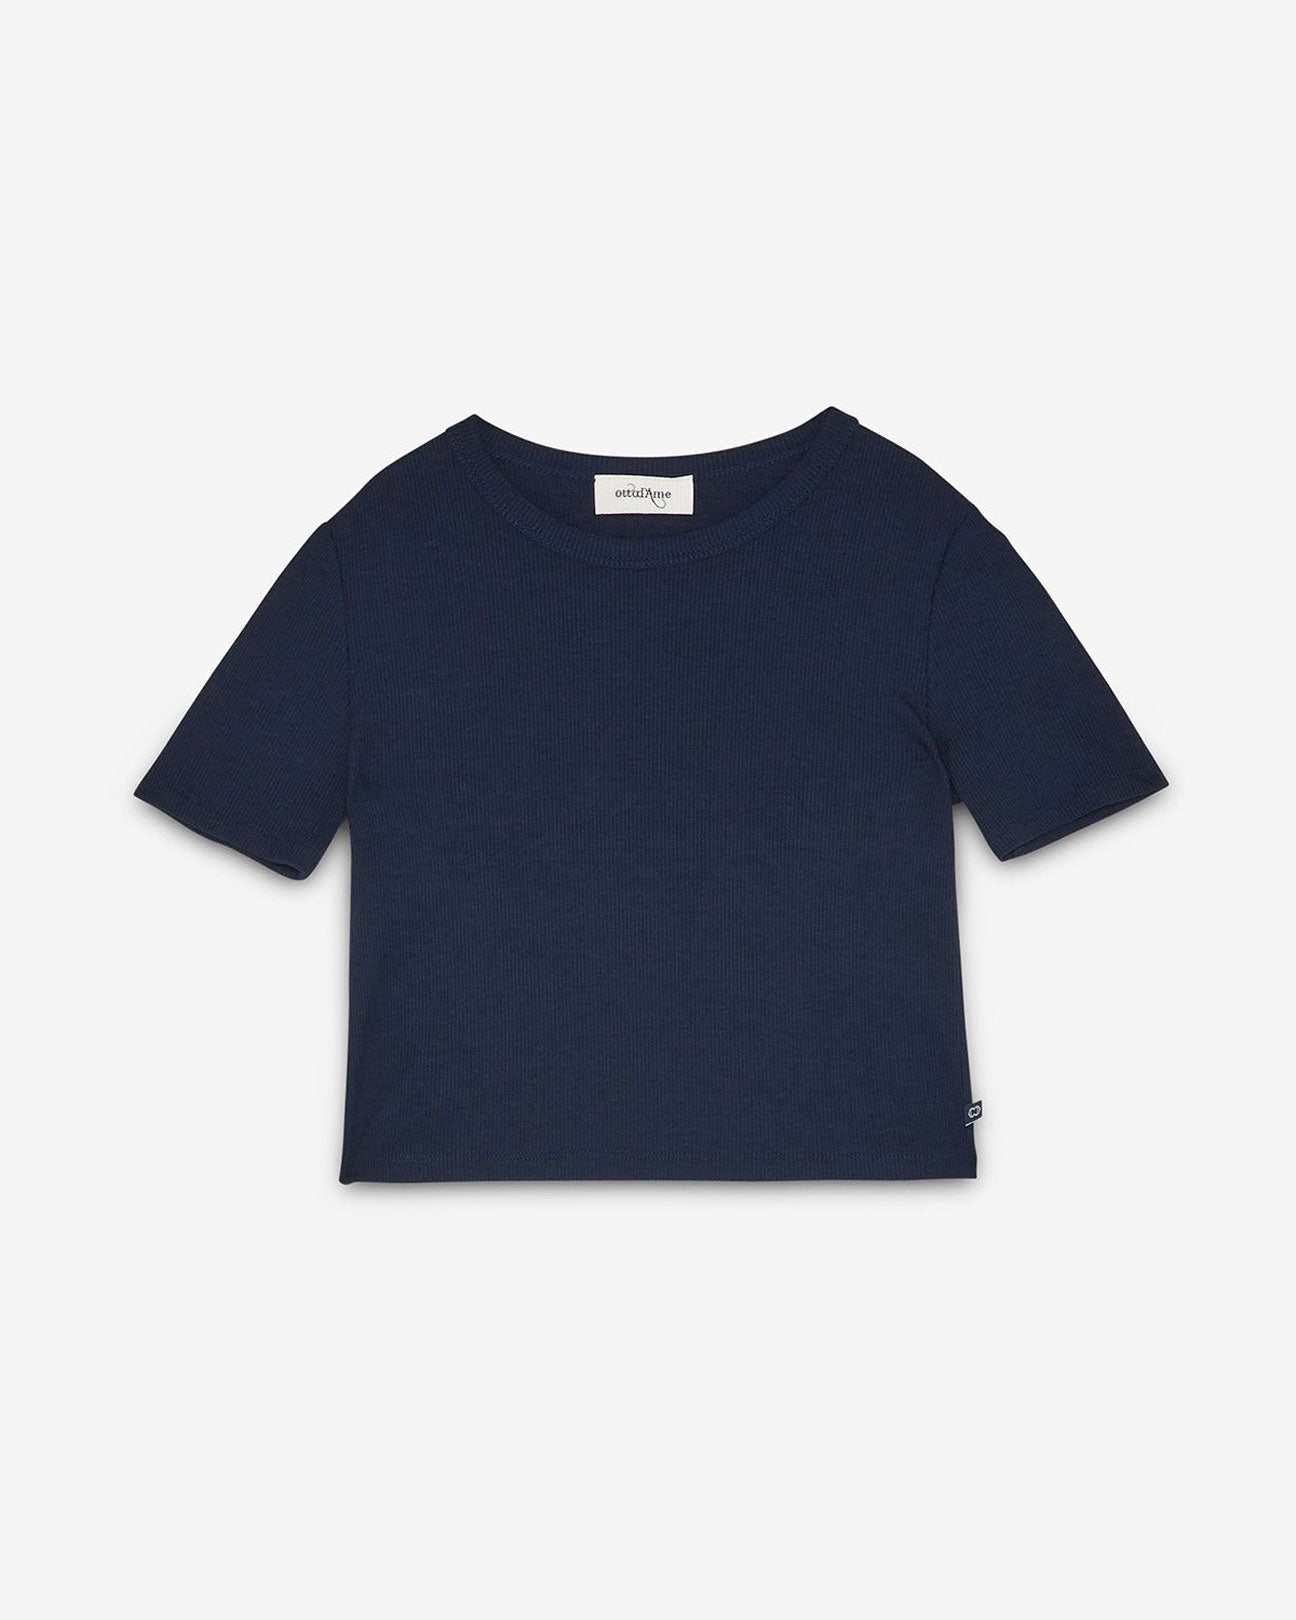 OTTOD'AME Ribbed Cropped Tee in Navy available at Lahn.shop